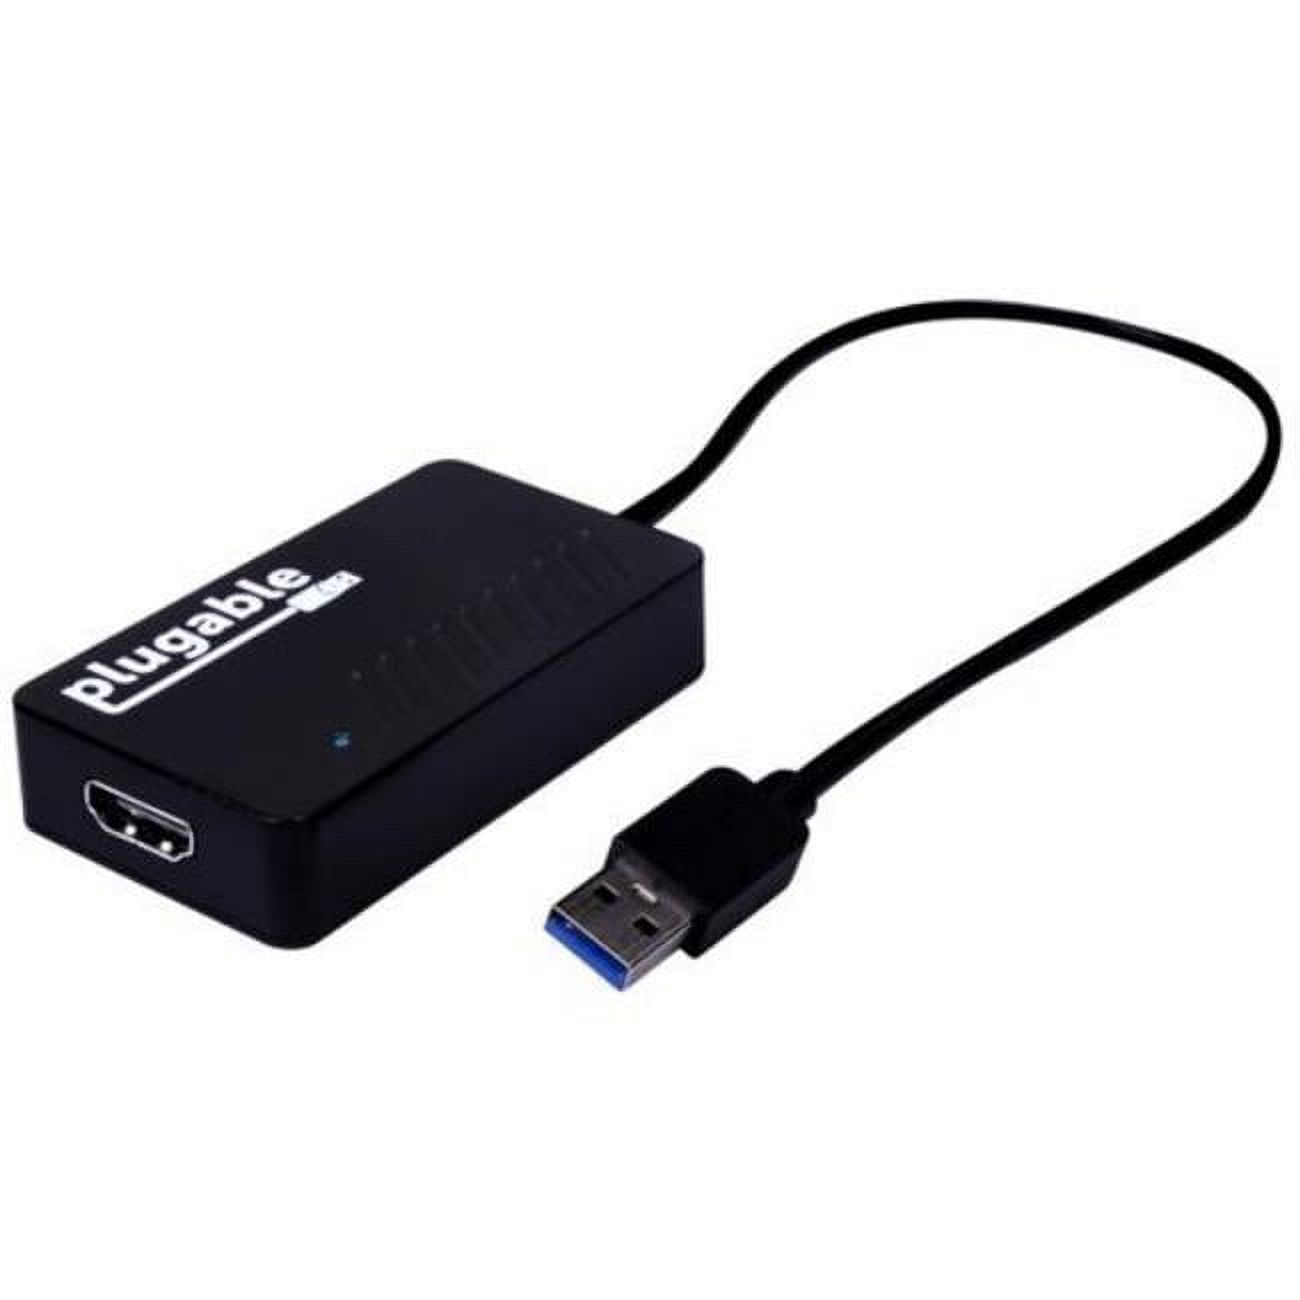 Plugable USB 3.0 to HDMI 4K UHD Video Graphics Adapter for Multiple Monitors up to 3840x2160 Supports Windows 11, 10, 8.1, 7 - image 1 of 6